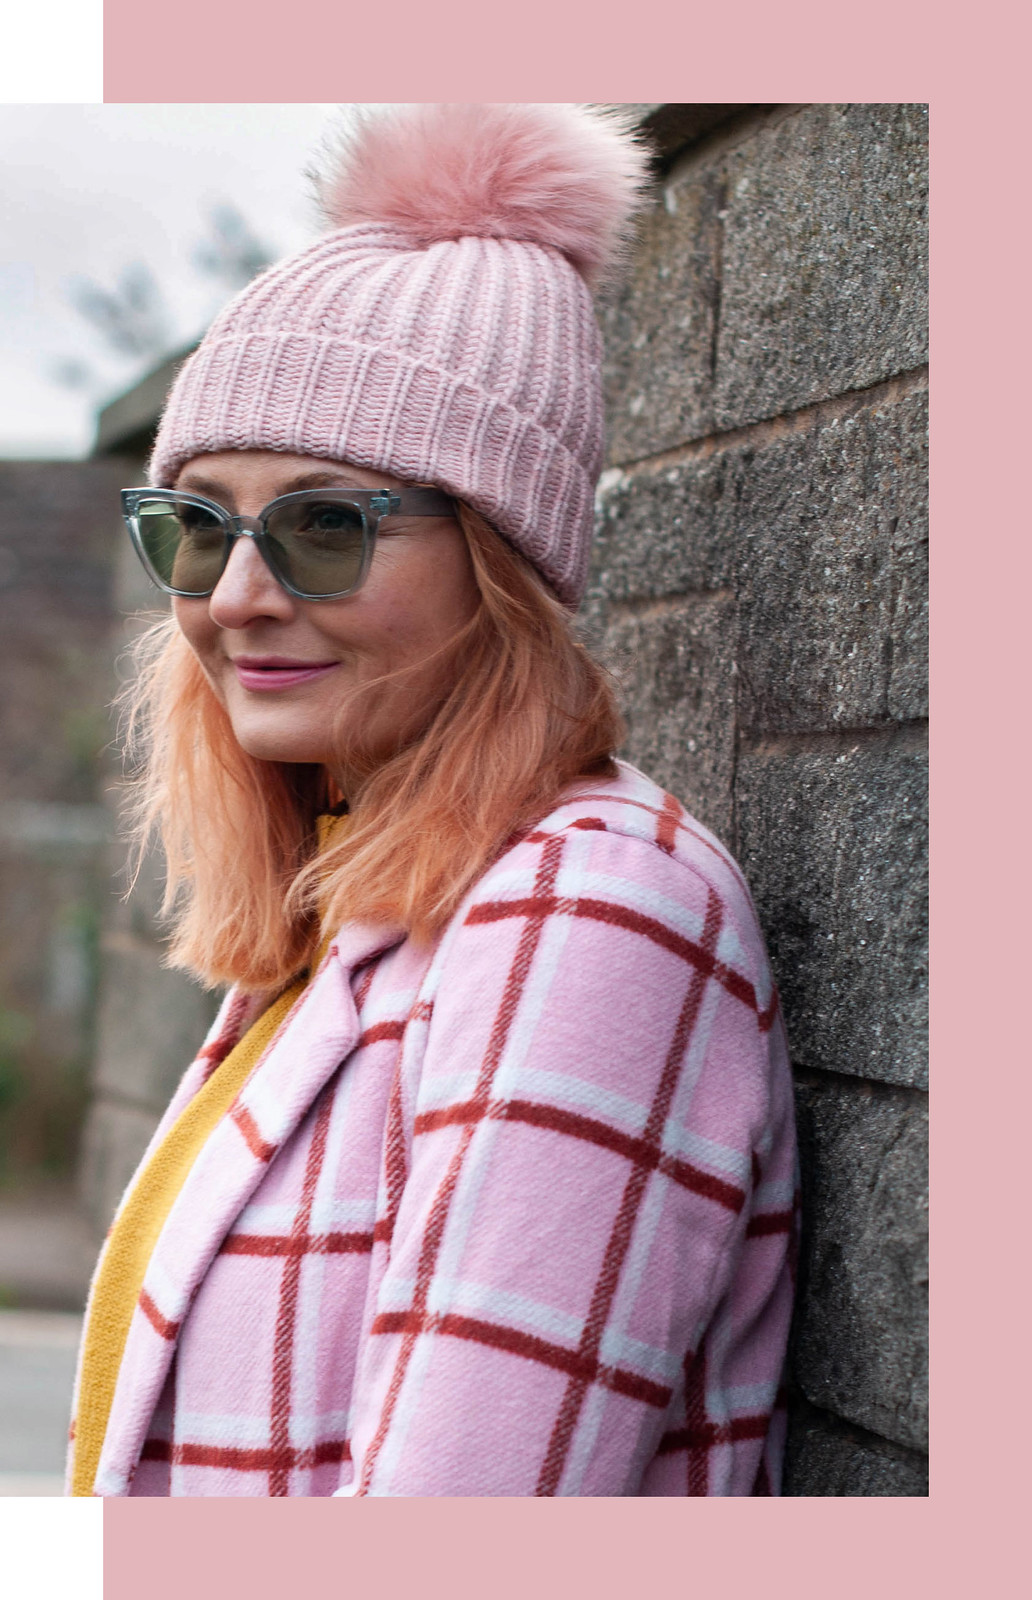 Winter Brights in Shades of Pink and Yellow | Not Dressed As Lamb, Fashion Over 40